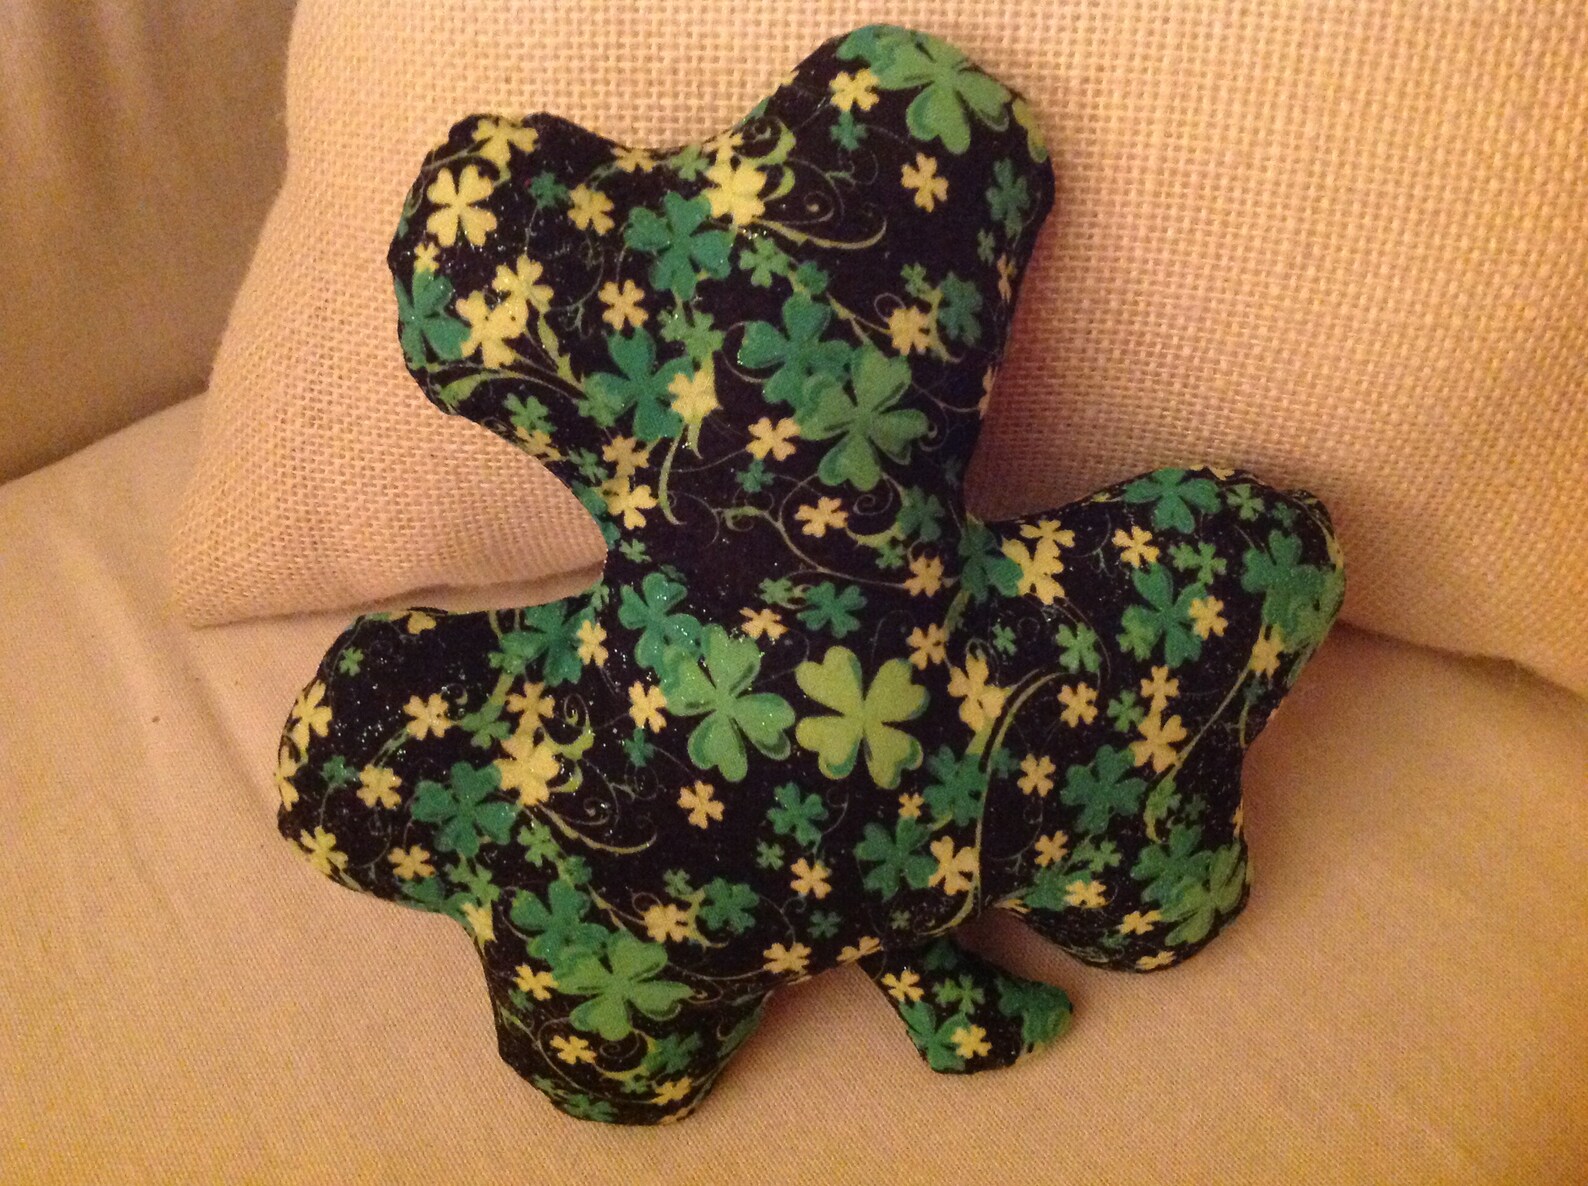 15 Wonderful St. Patrick's Day Pillow Cover Designs for an Irish Touch